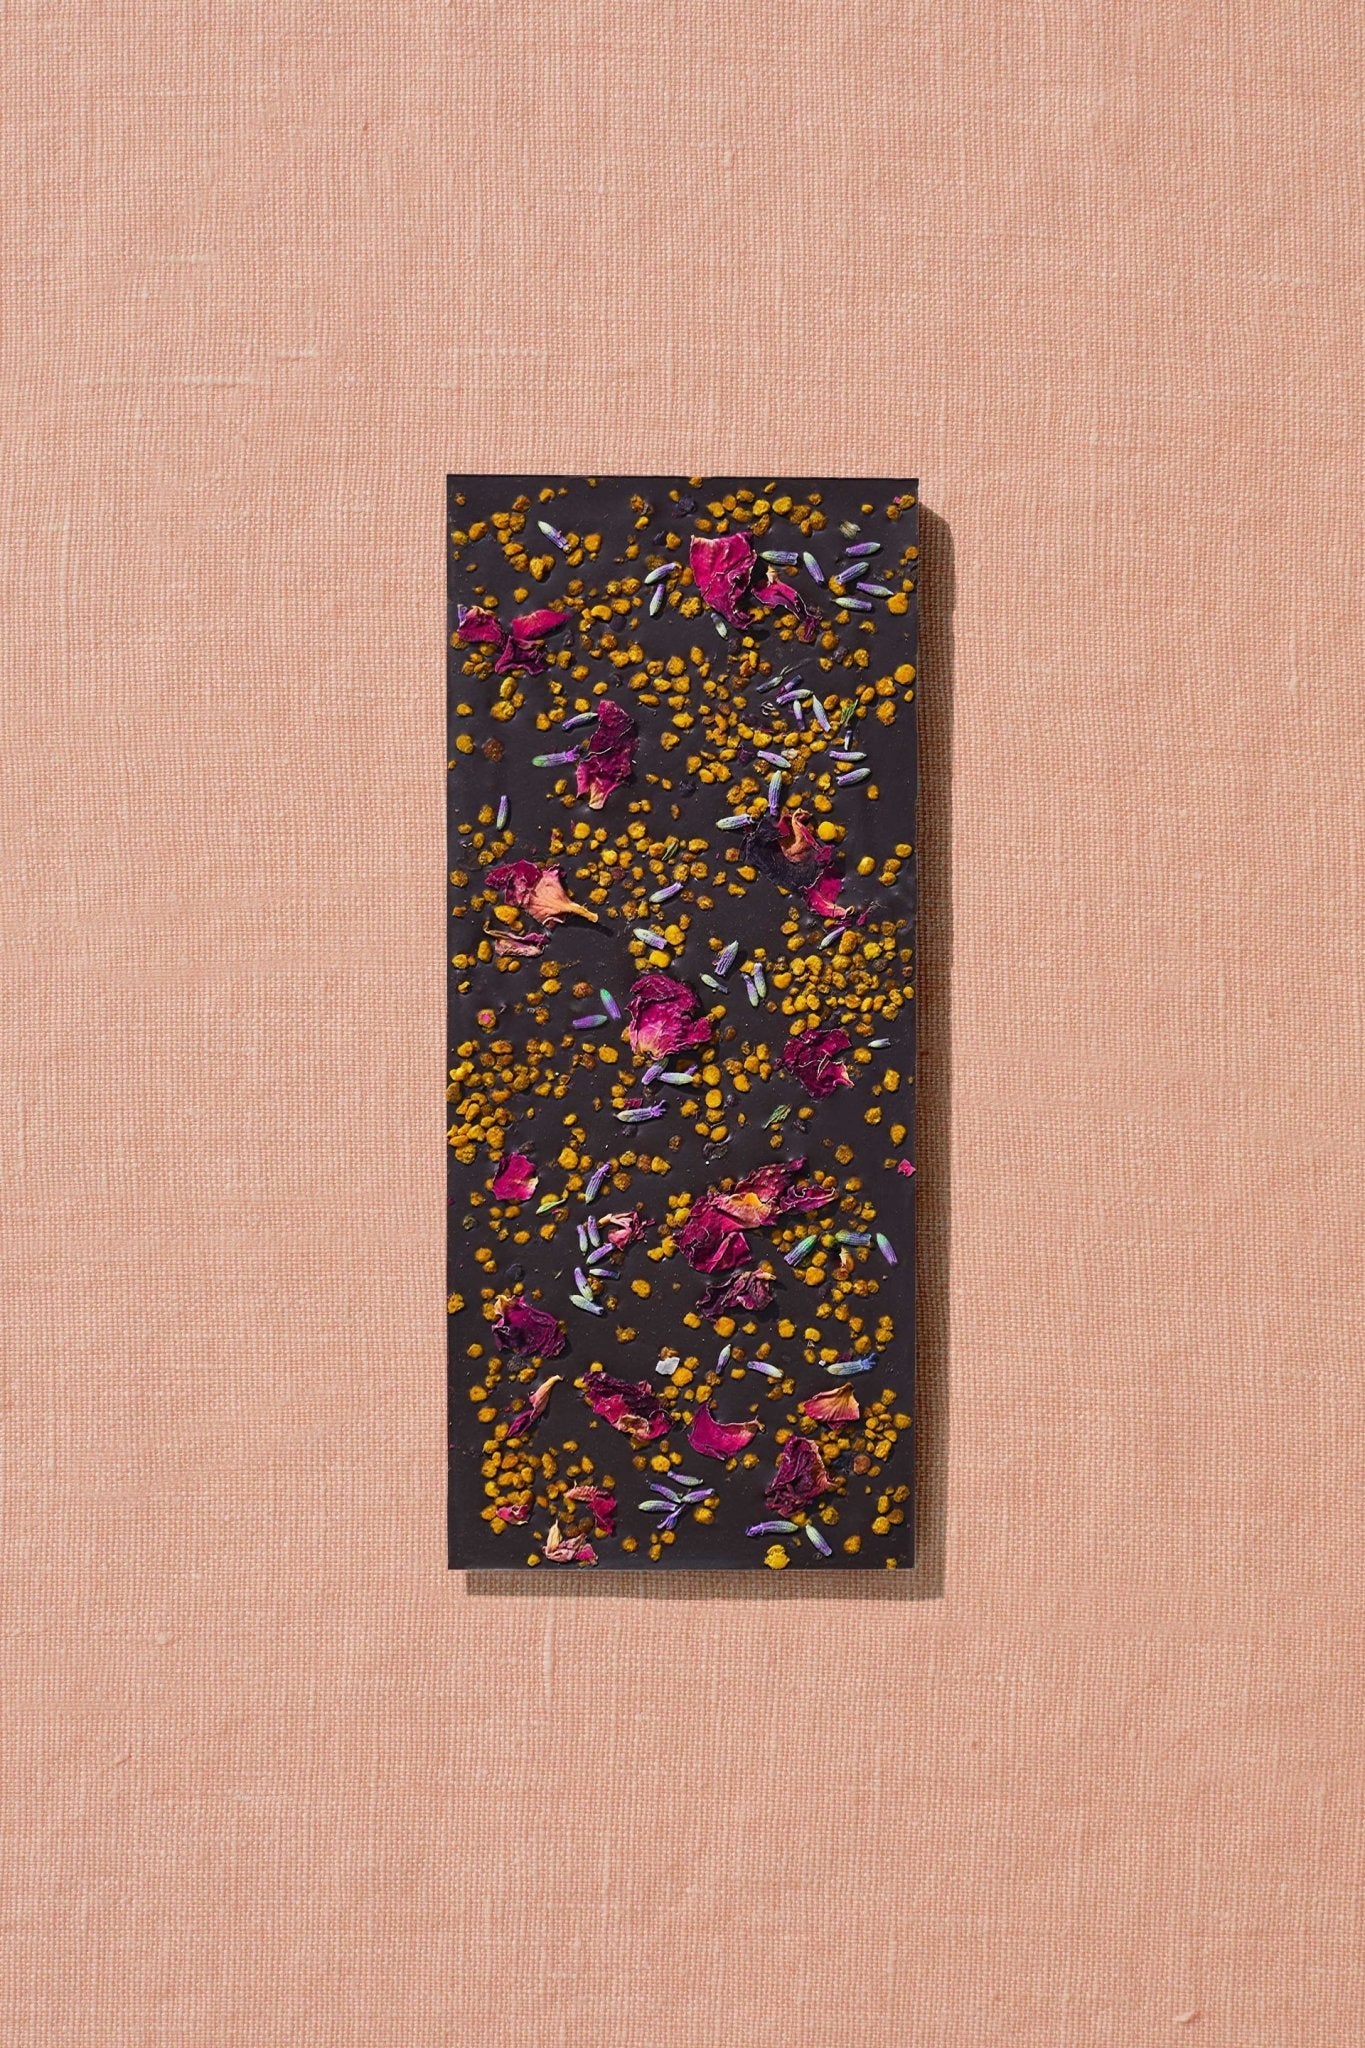 Spring & Mulberry Chocolate - Lavender, Bee Pollen, Rose Petals